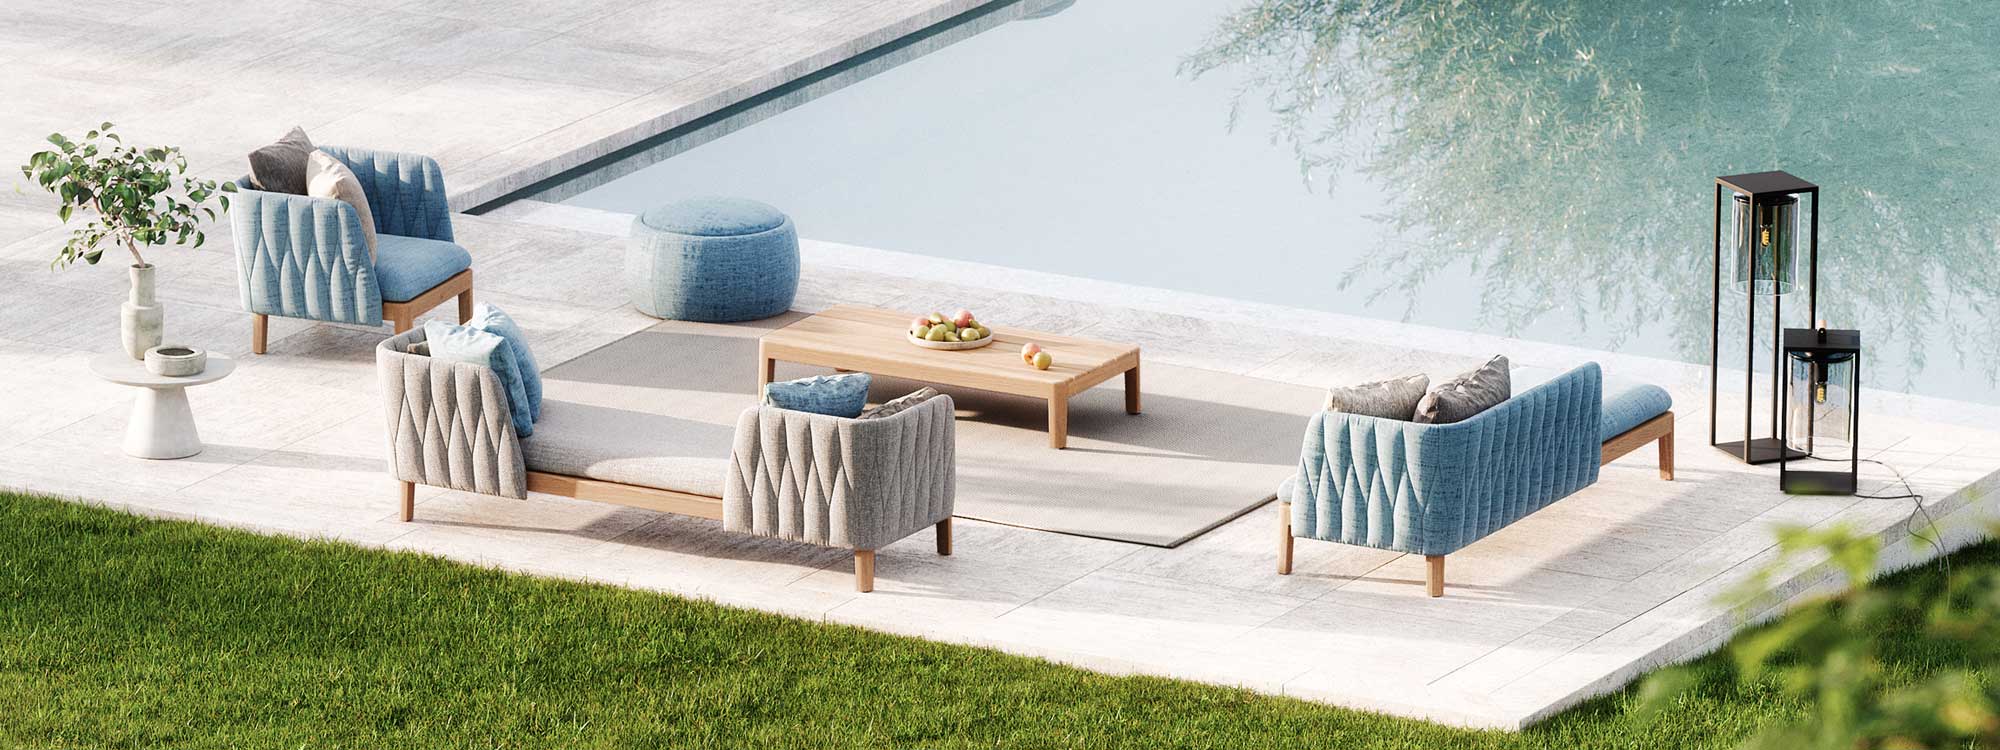 Image of Royal Botania Calypso lounge furniture in light blue and grey on poolside